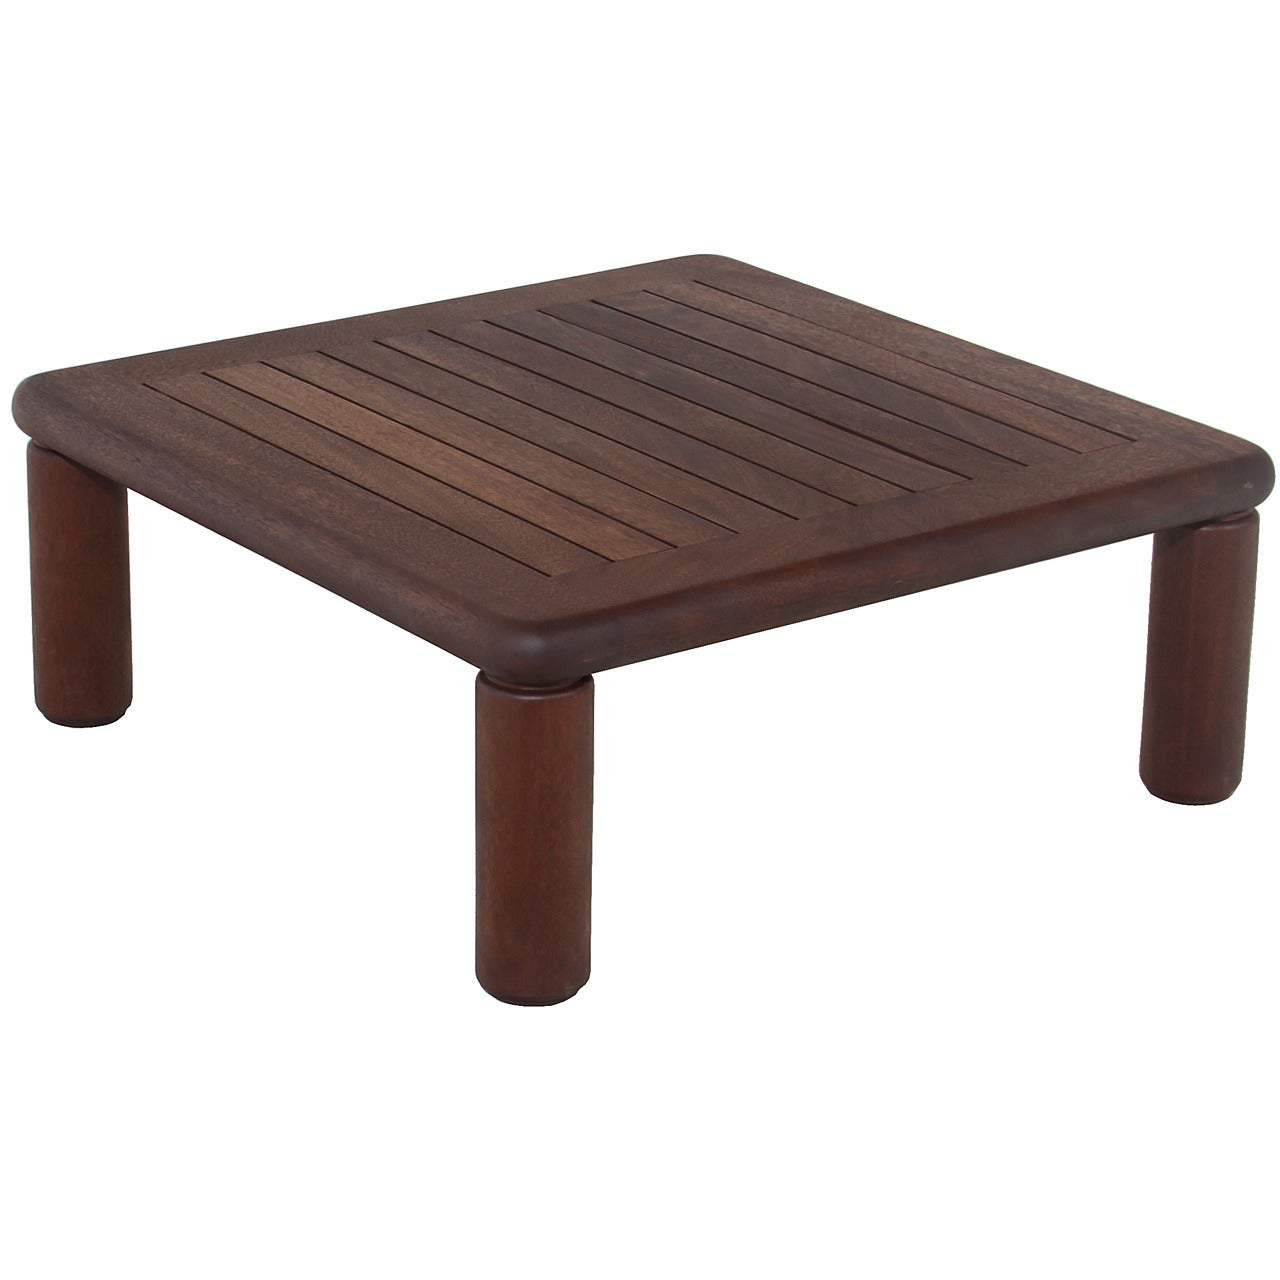 Slatted Solid Honduran Mahogany coffee table by Sherrill Broudy For Sale